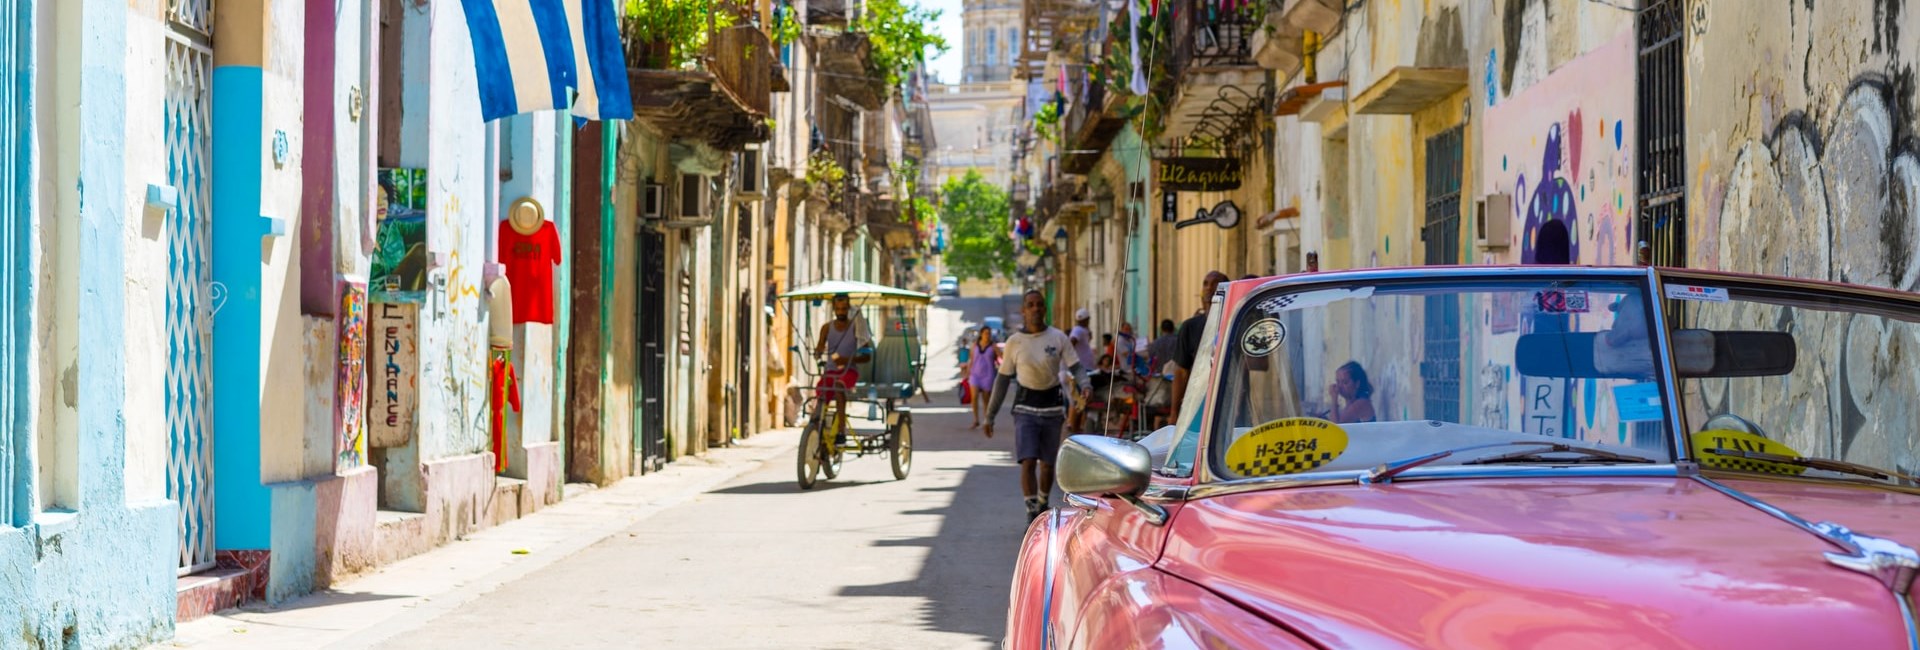 Pink convertible car parked on a quiet residential street in Havana 